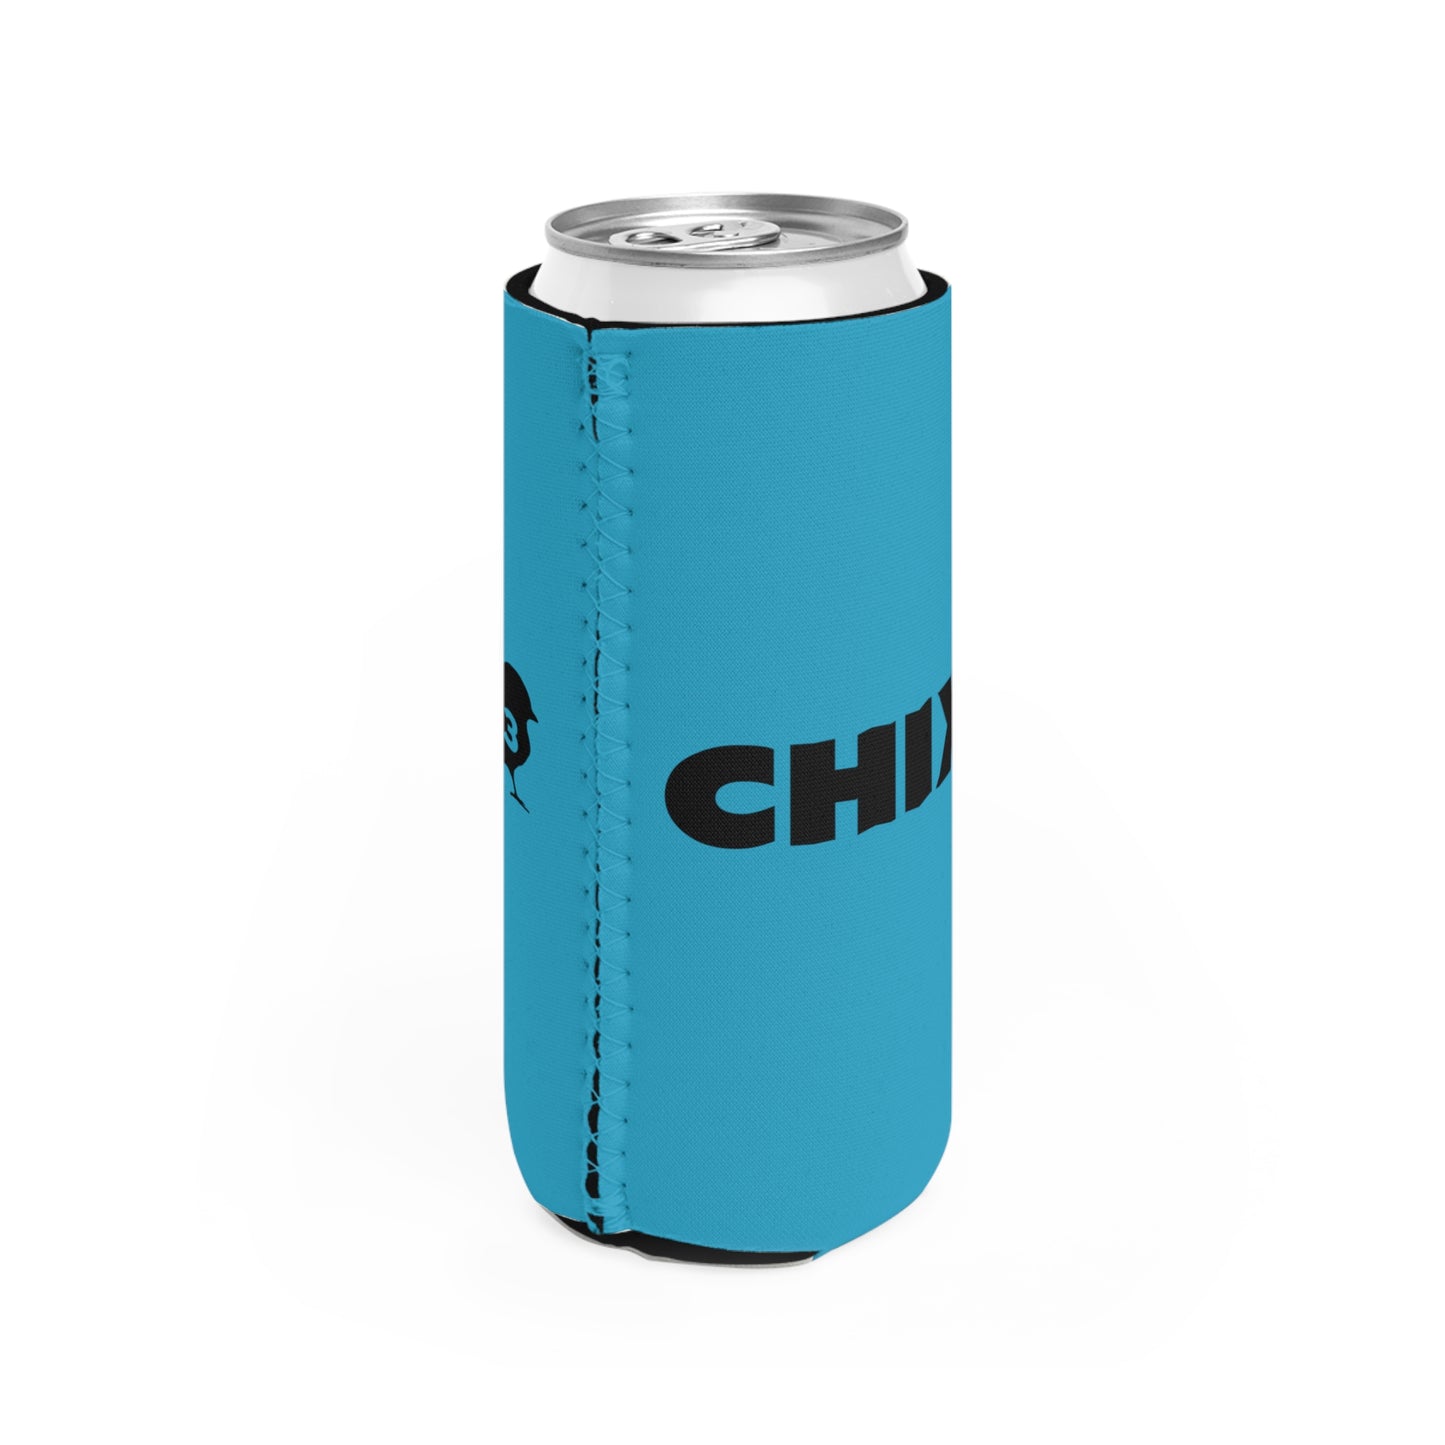 Slim Can Cooler - black on turquoise